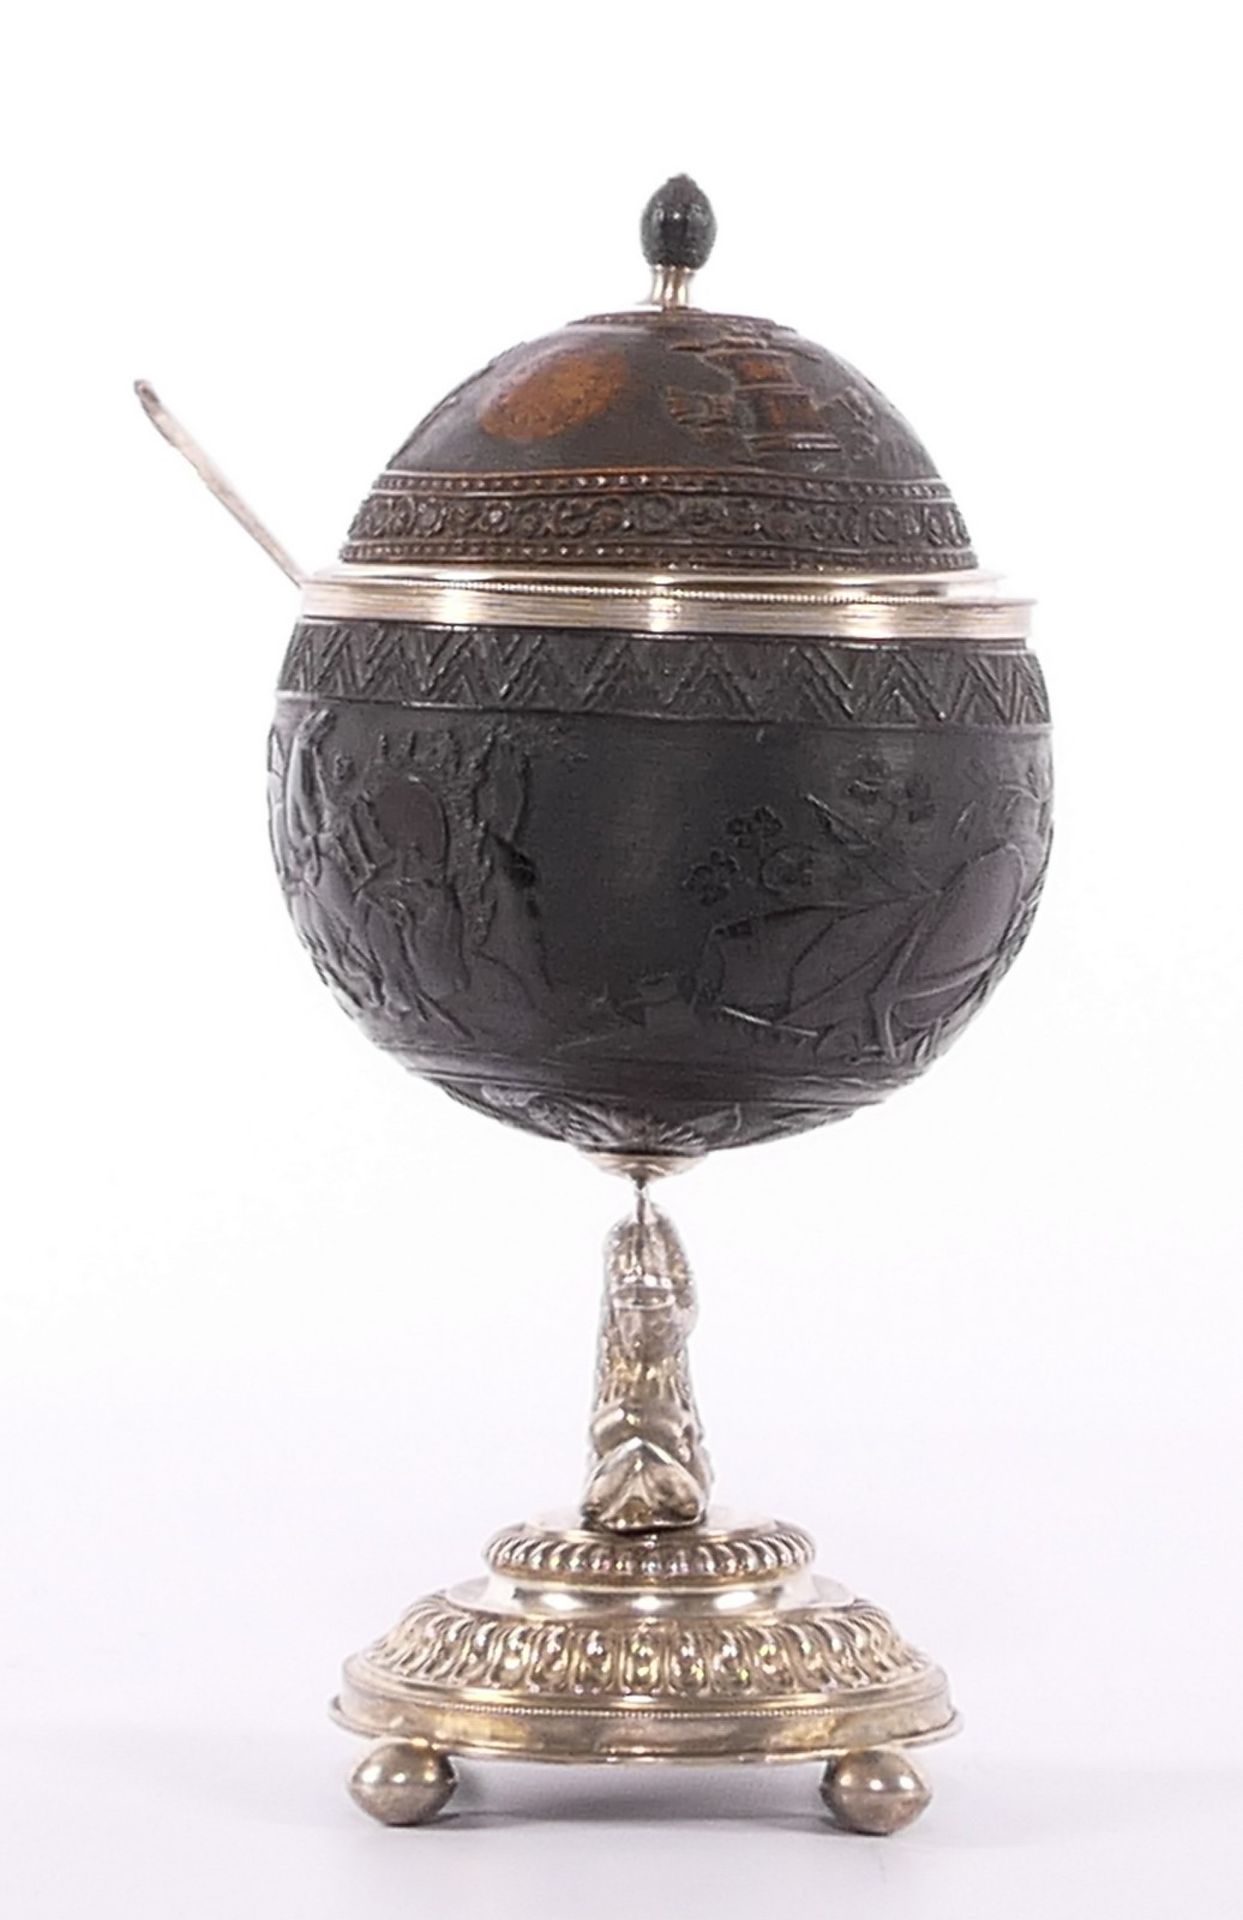 Coconut cup, basso relievo decorated with mythological scenes, owners monogram DM, with a neobaroque - Bild 4 aus 12